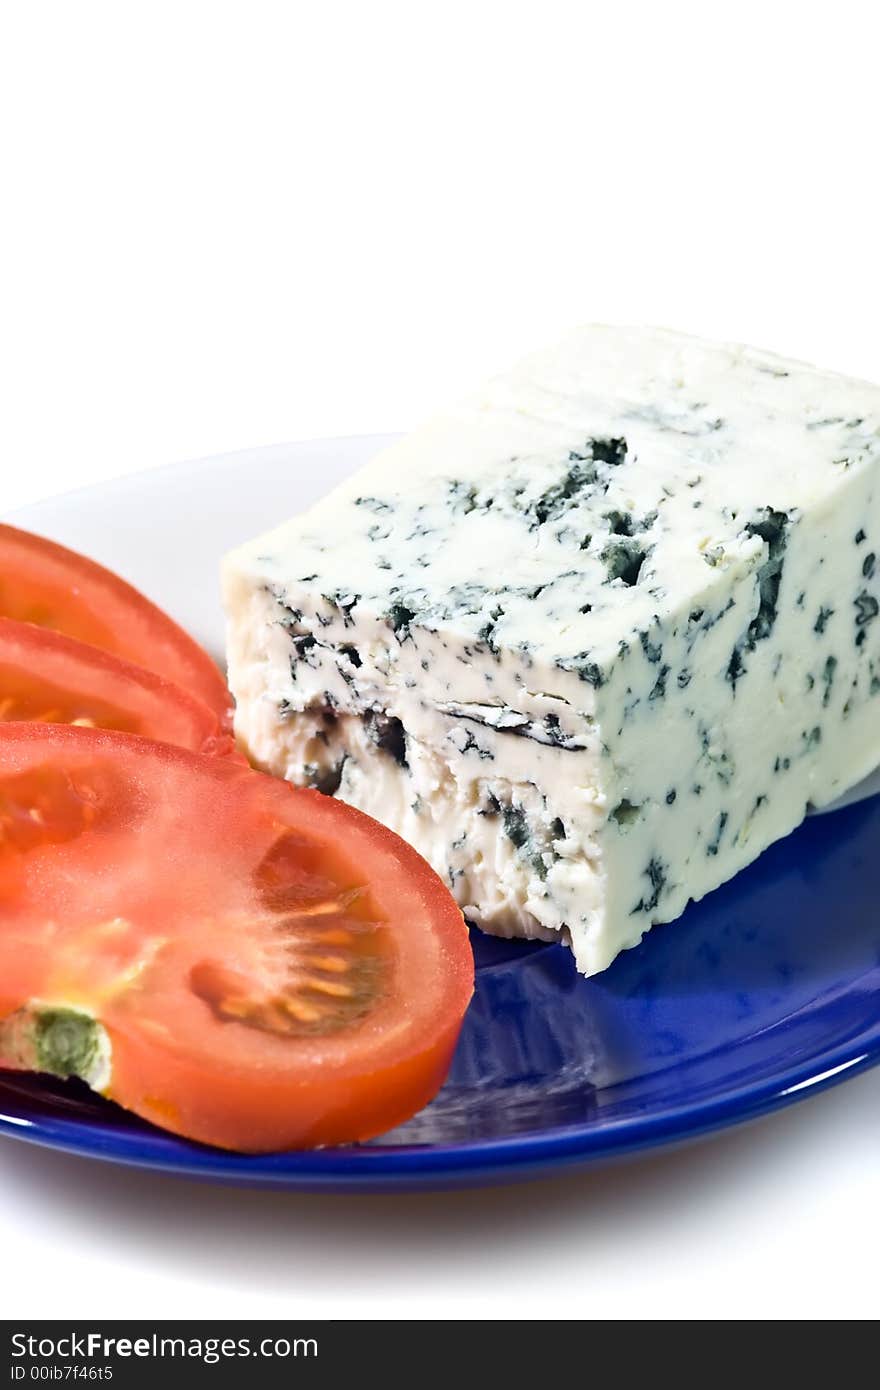 Closeup of blue cheese and tomato slices on the plate.